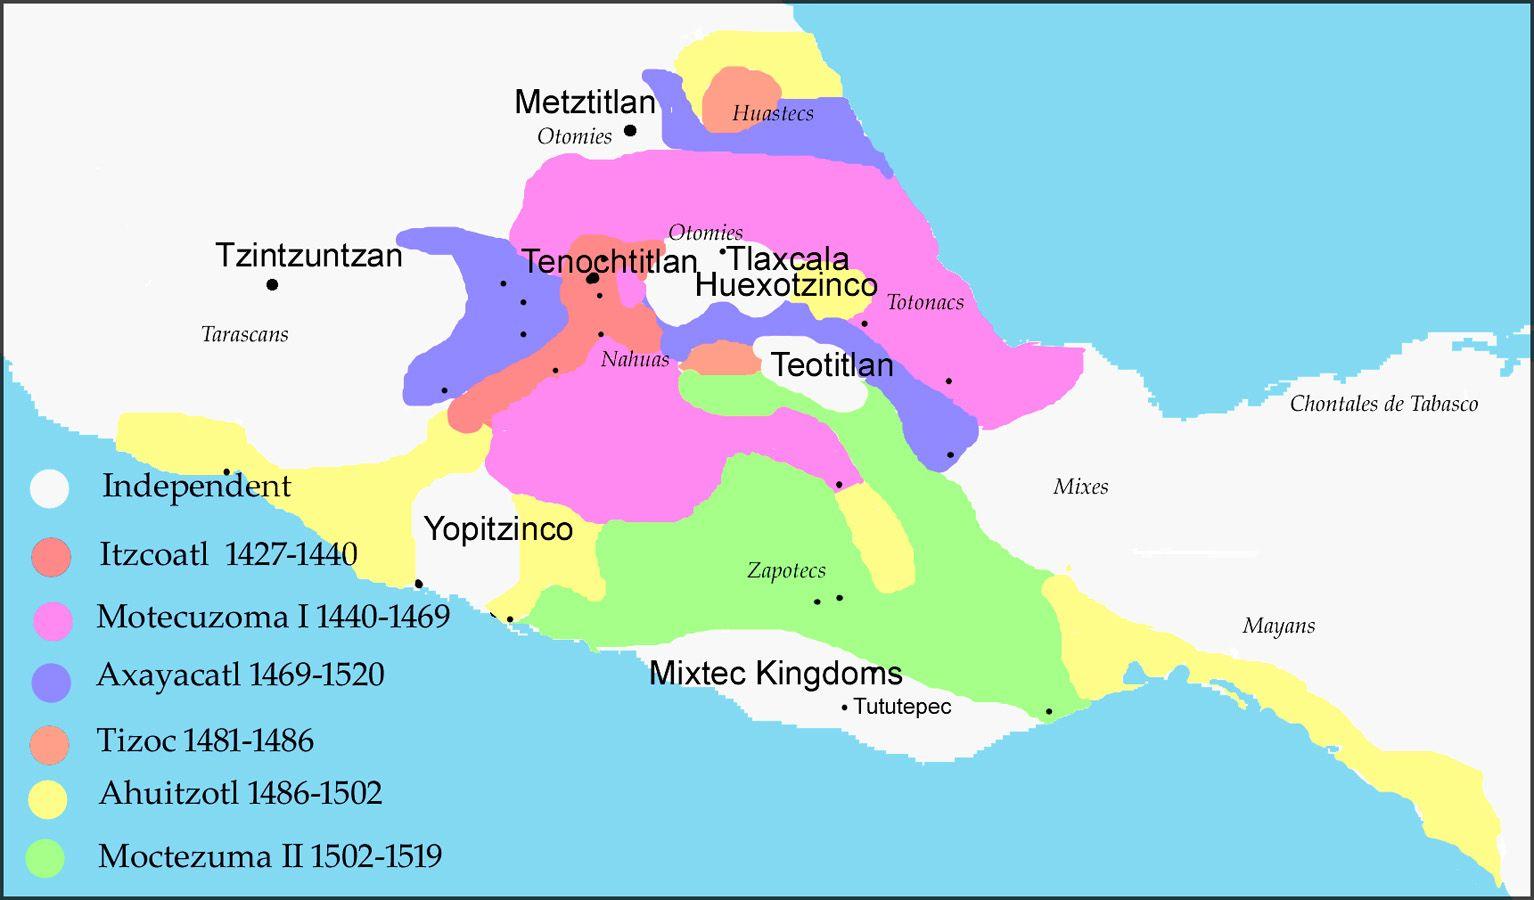 Aztec city-states before the Conquest